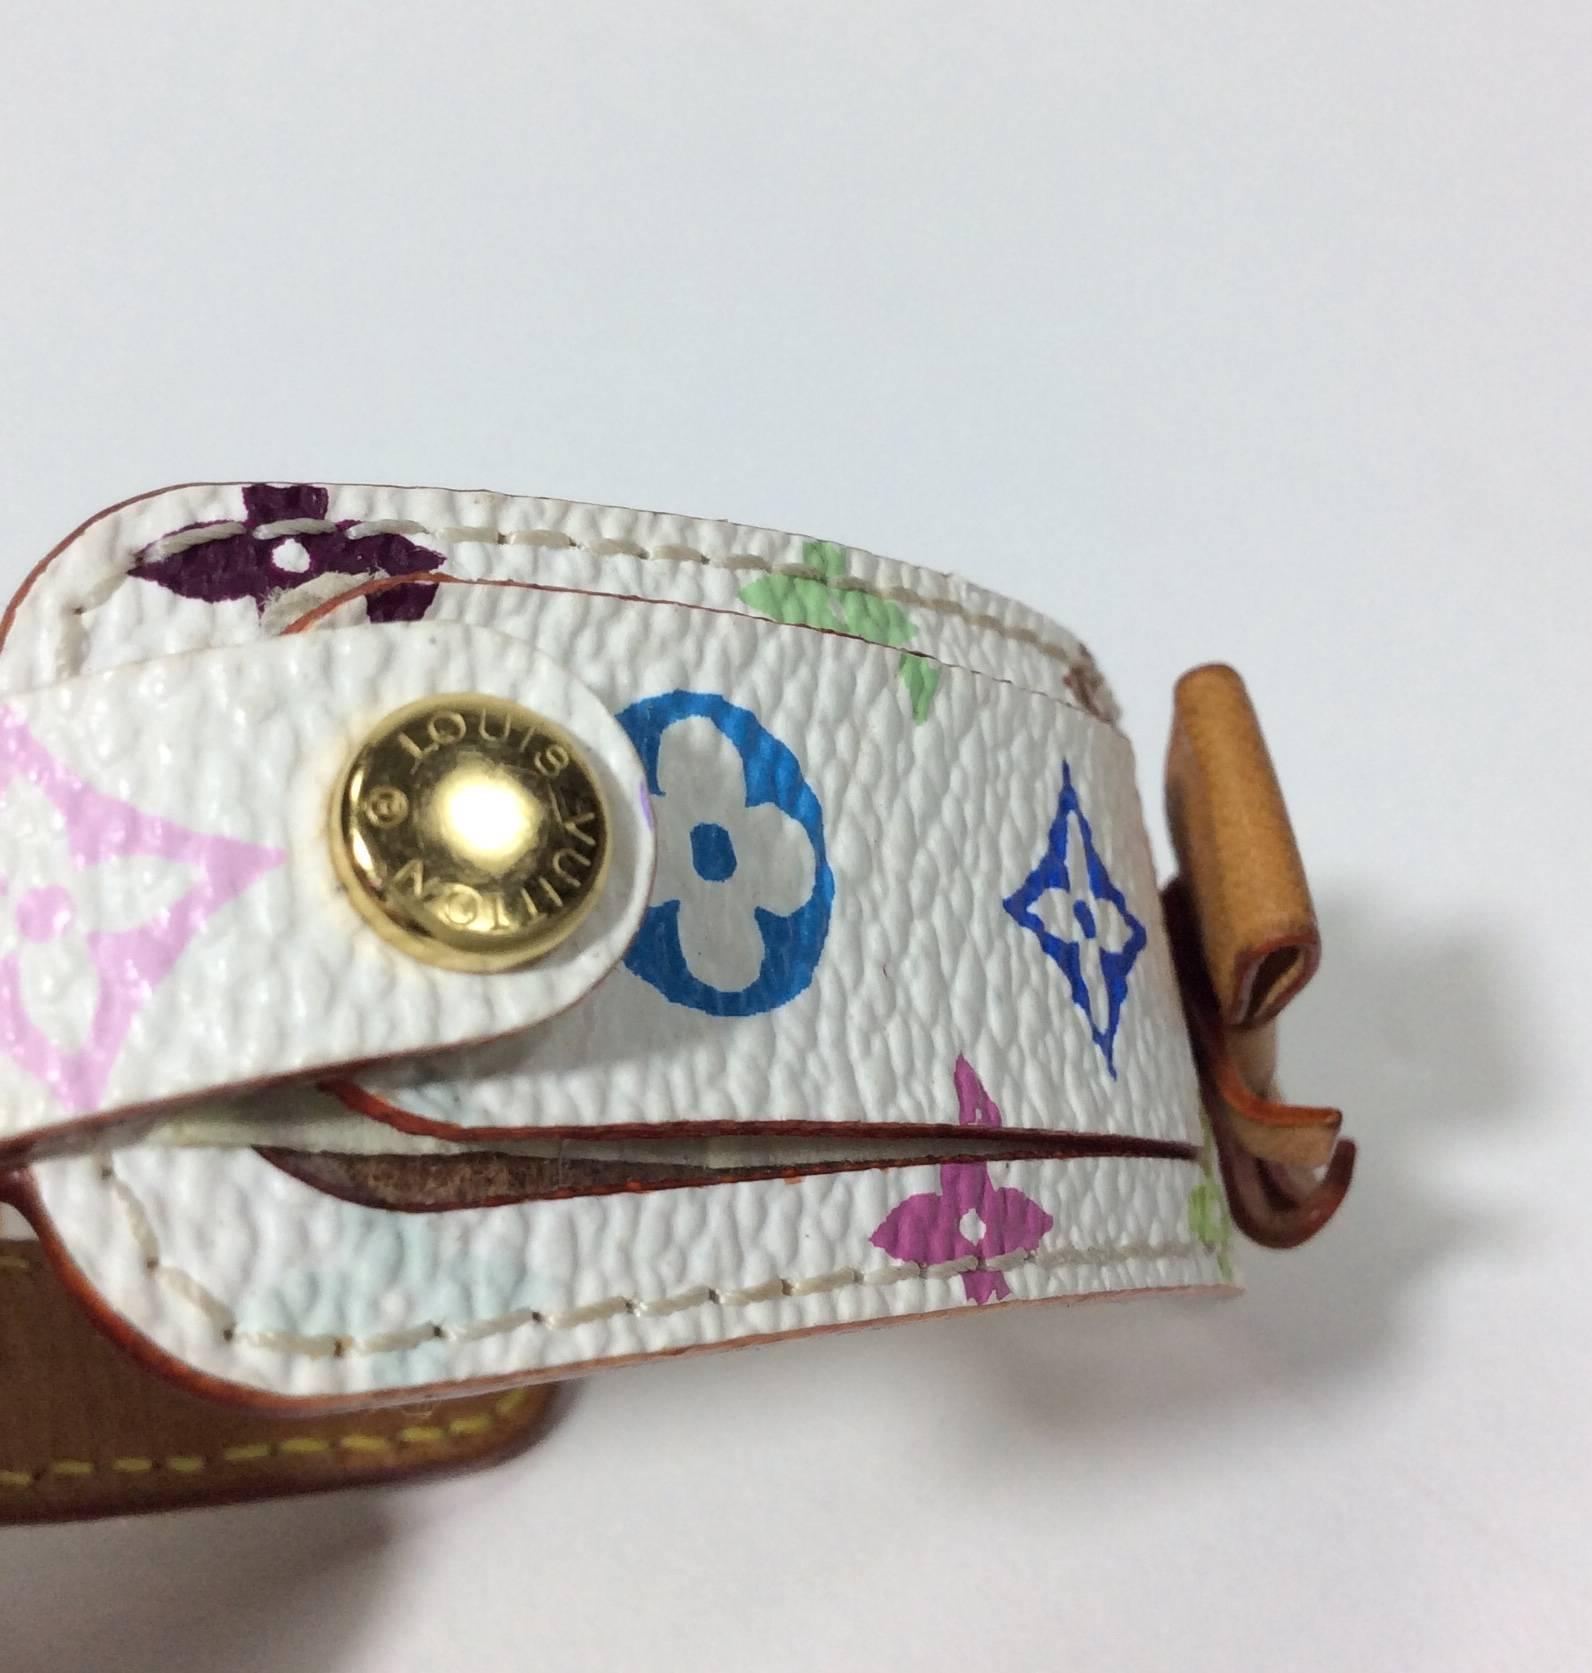 Leather Bracelet
Bow Detail
Multi Color LV Repeating Logo
Leather Bow Detail
Gold-tone Hardware and Closure